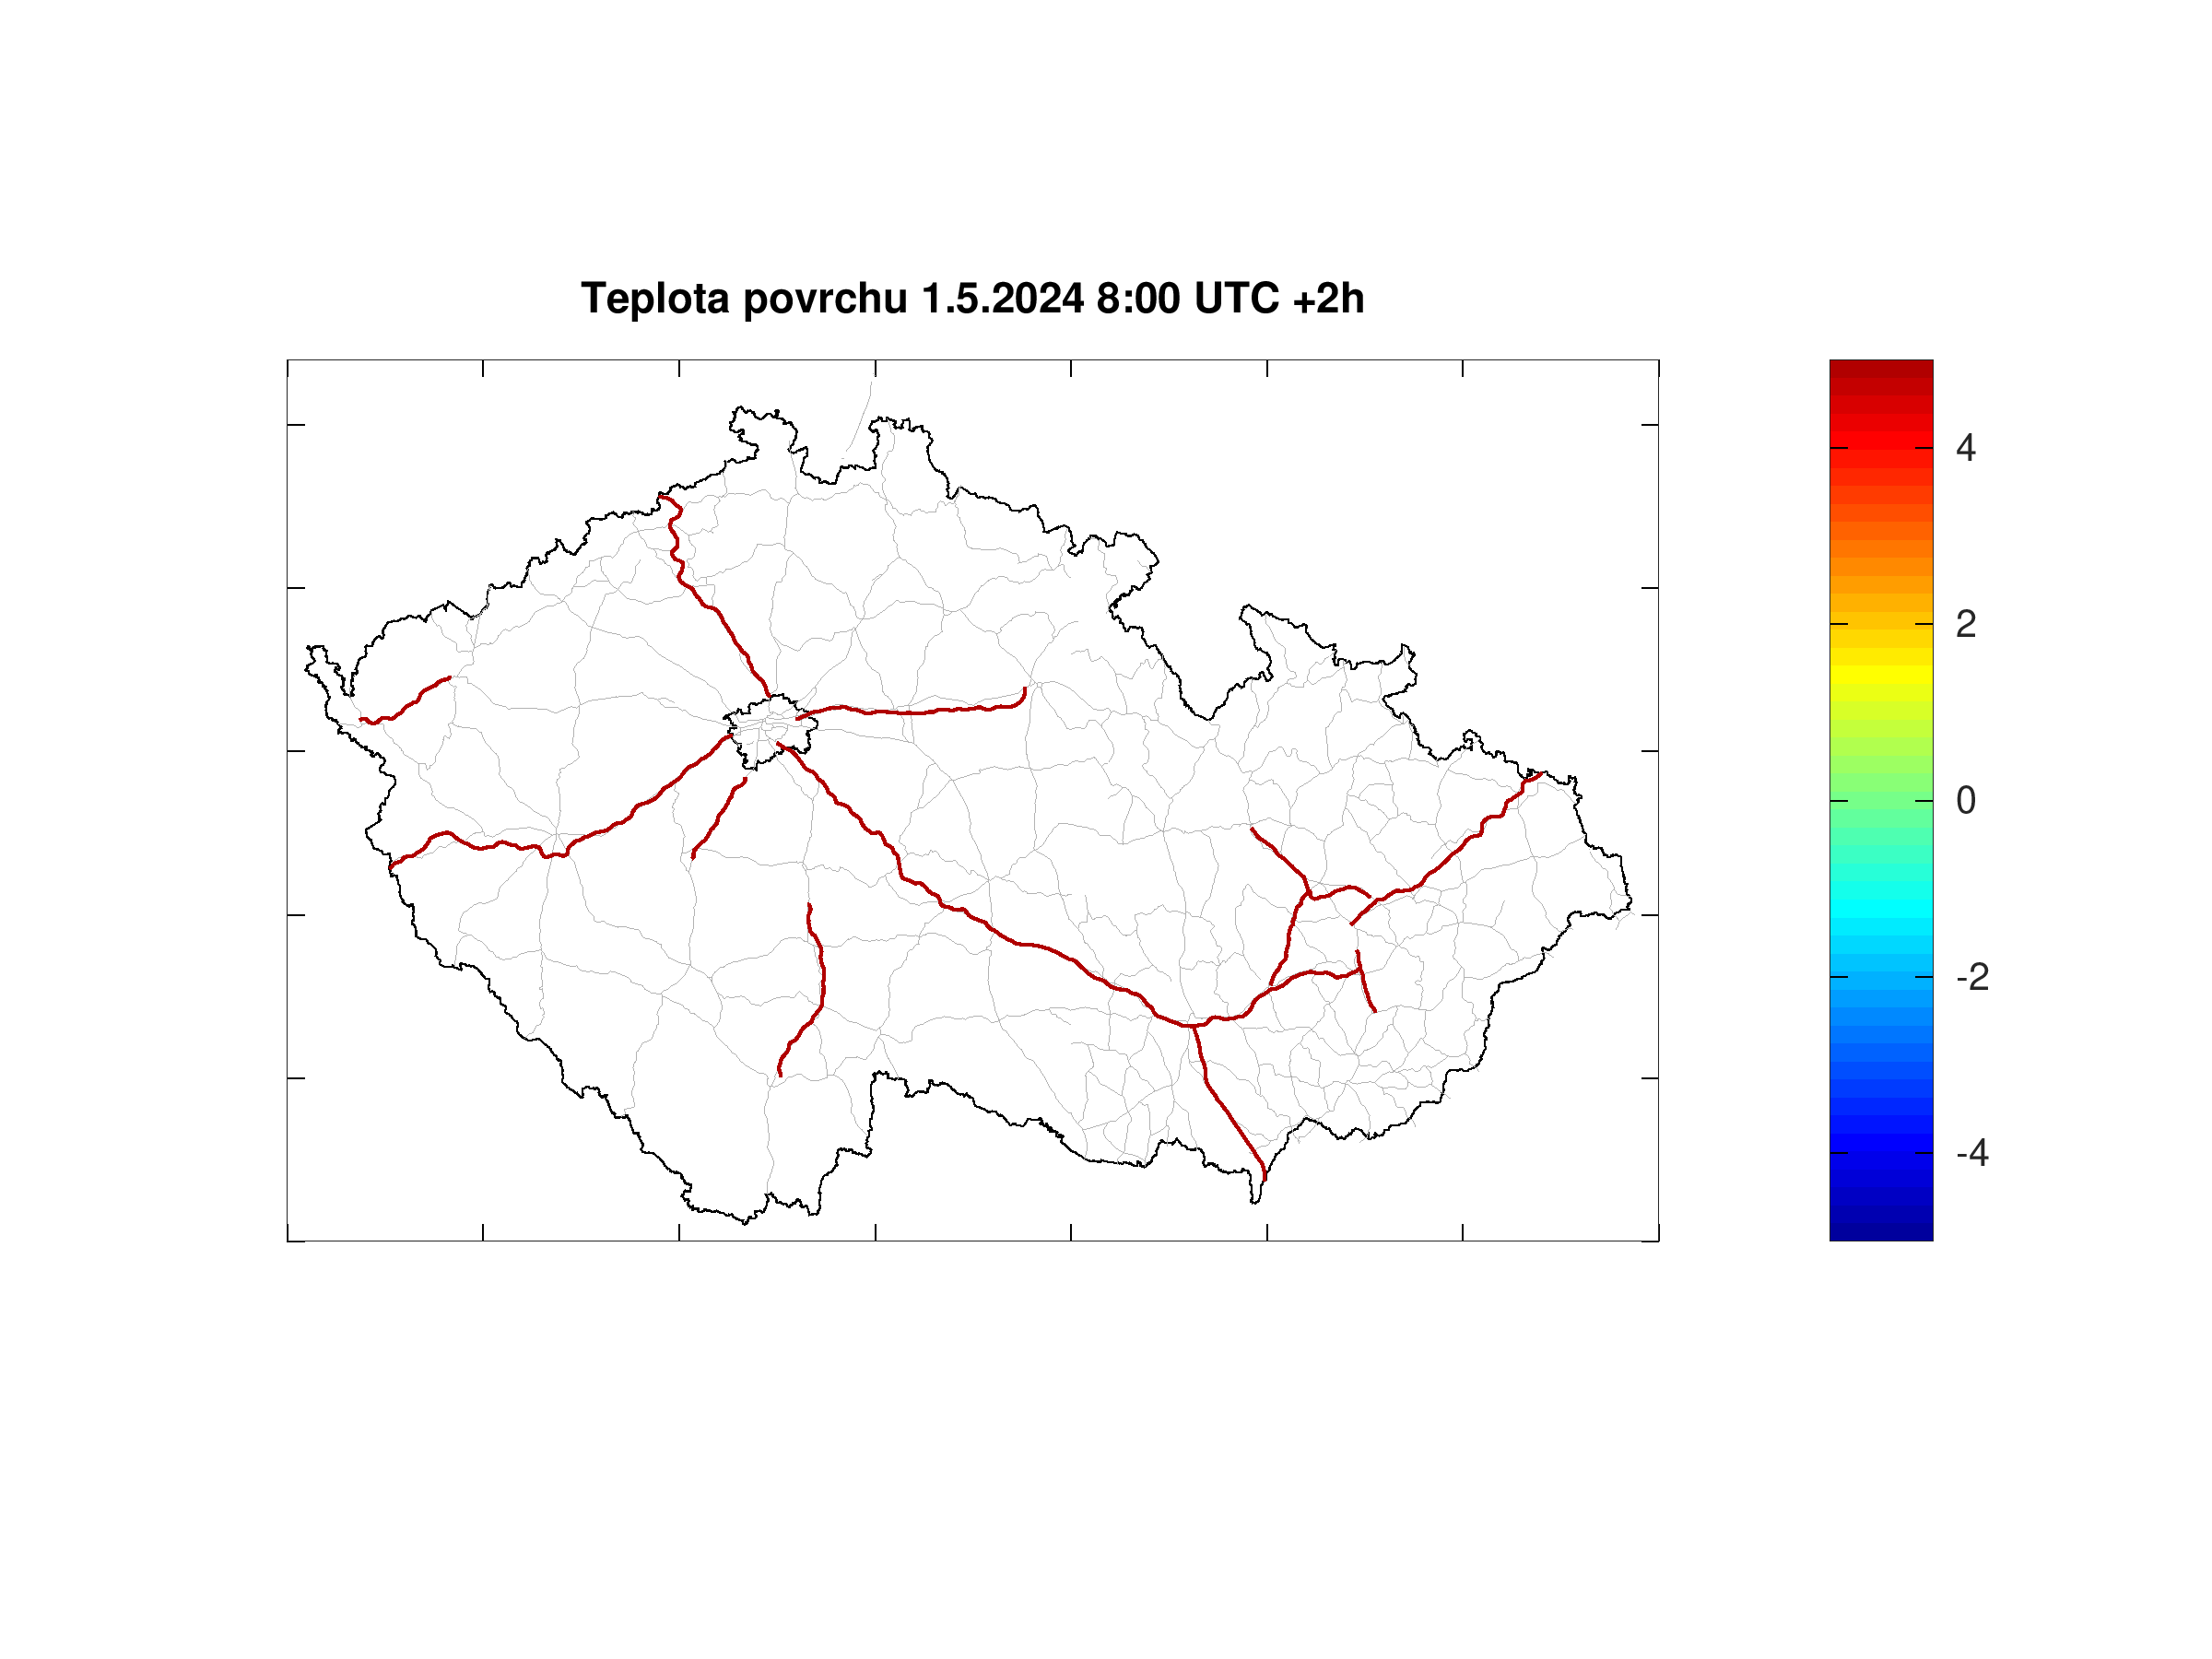 Road surface teperature forecast for Czech highways +2h